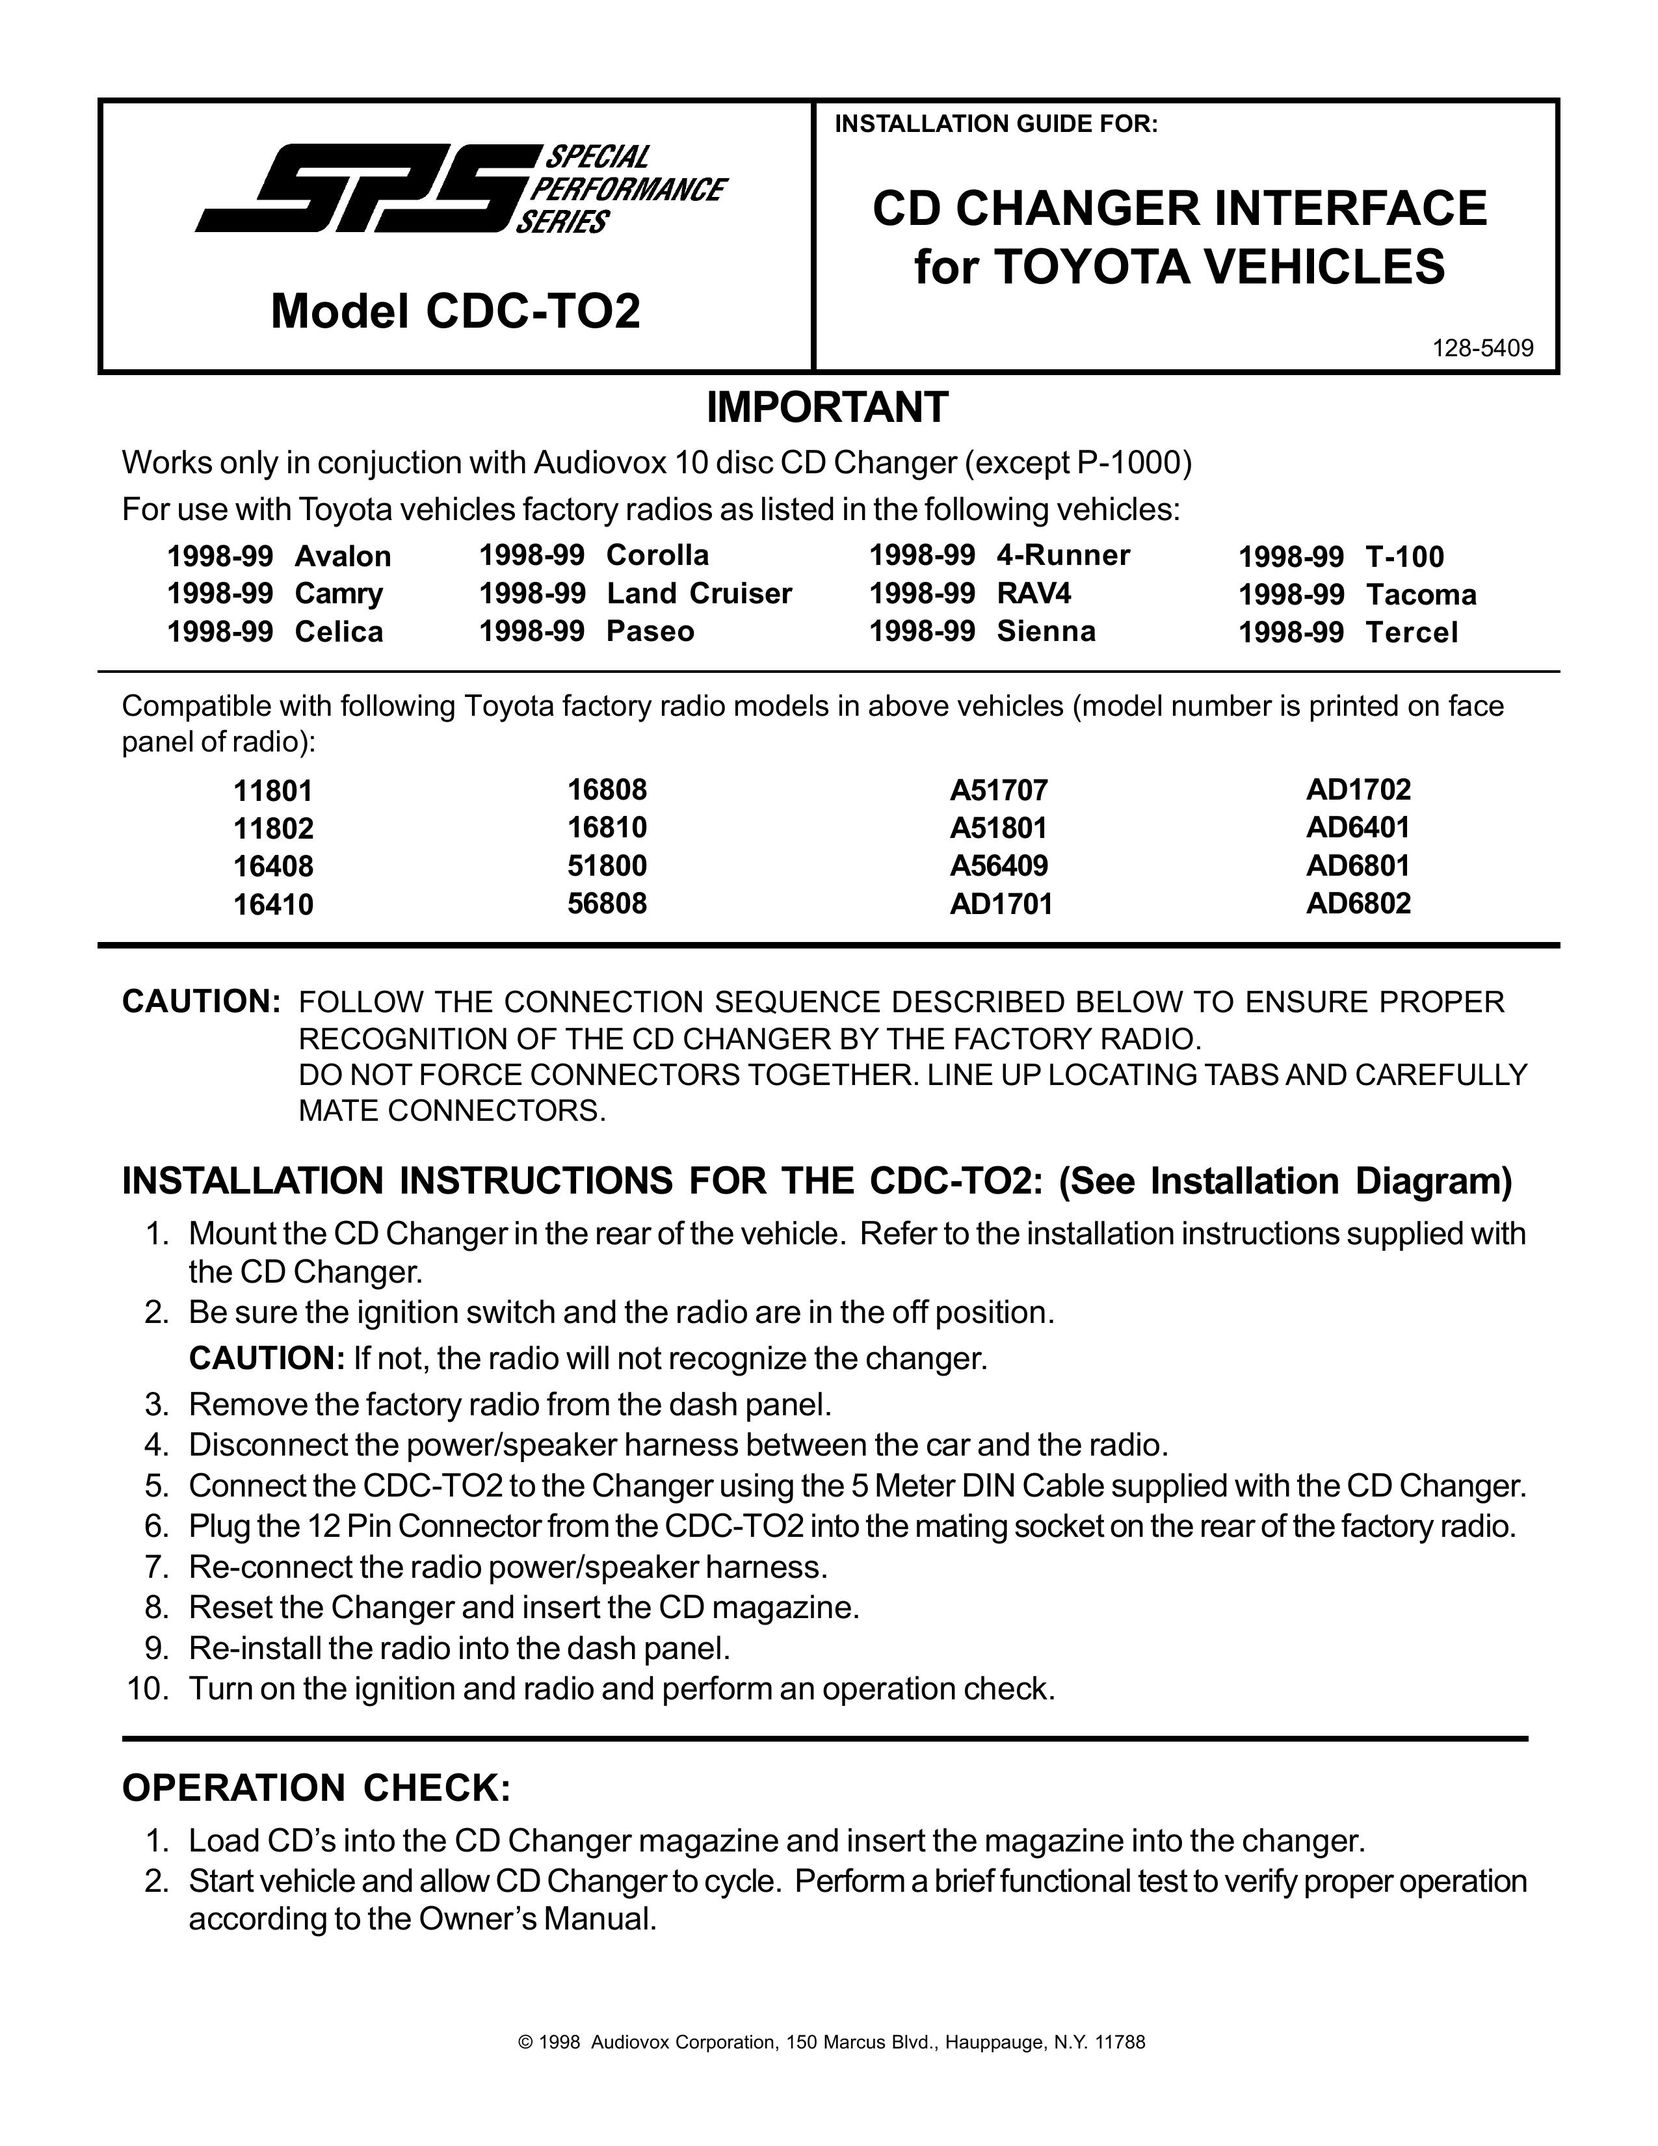 Audiovox CDC-TO2 Car Stereo System User Manual